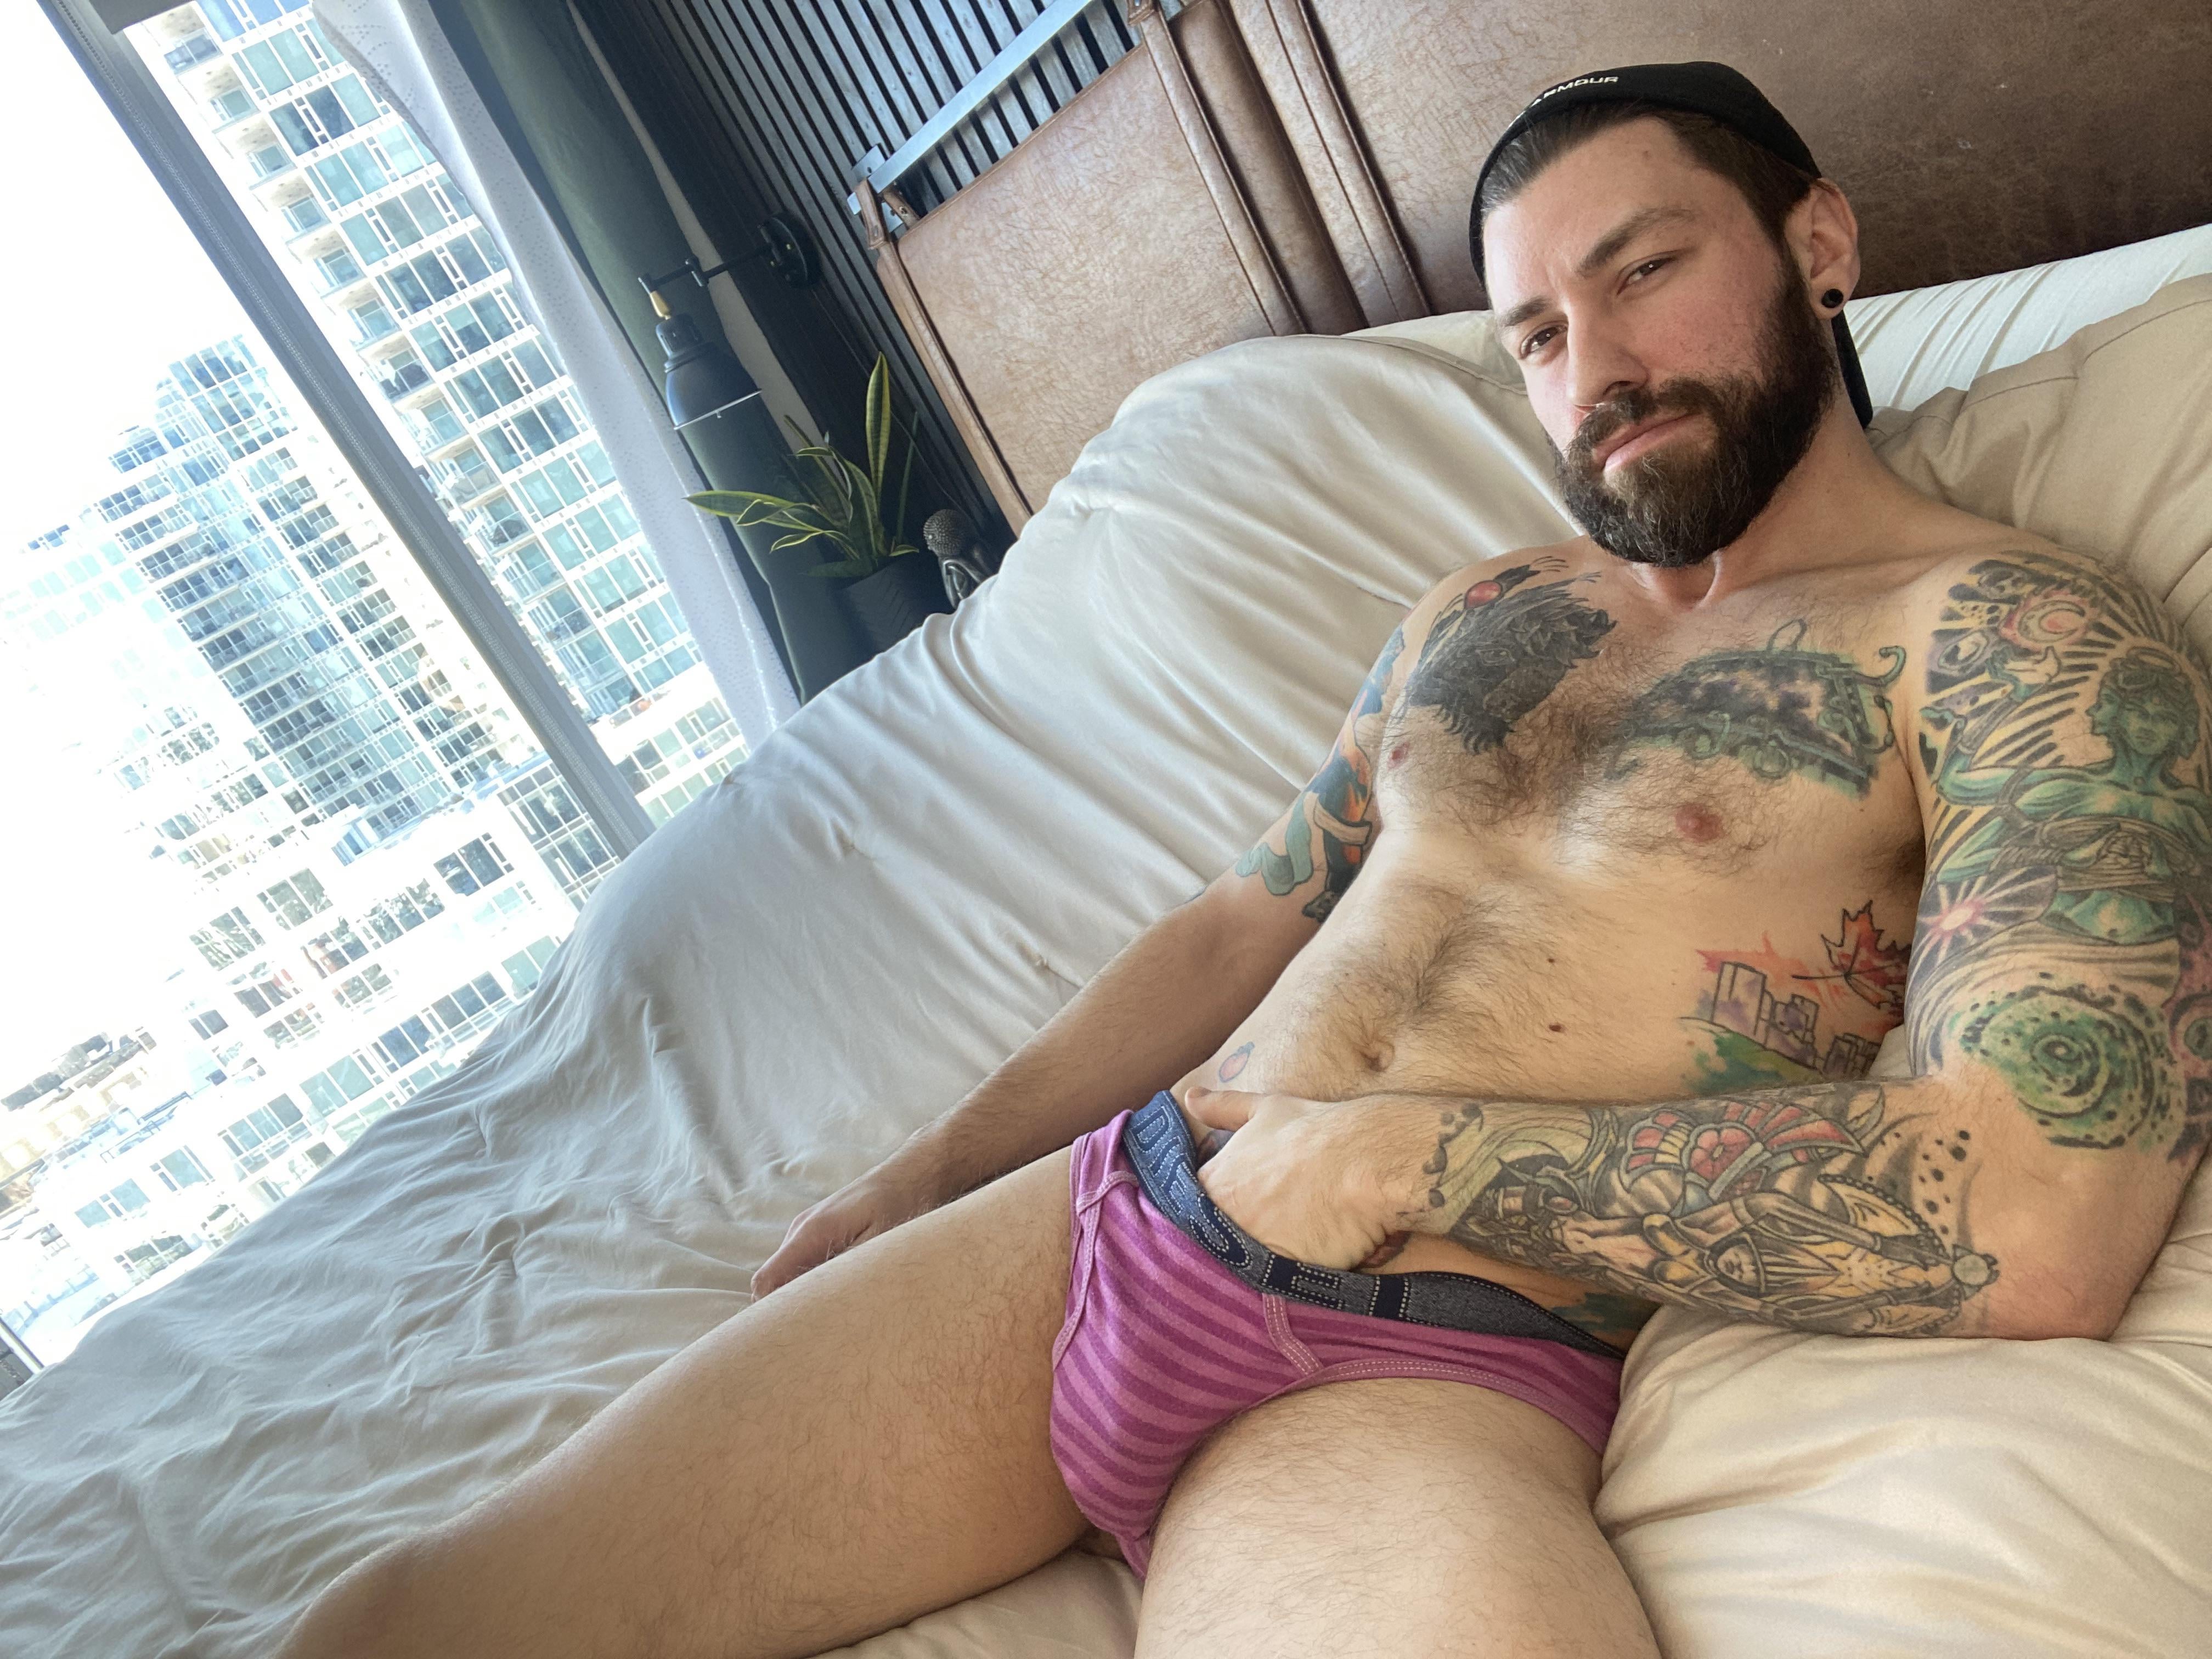 31 Canada Who wants to crawl in bed with me